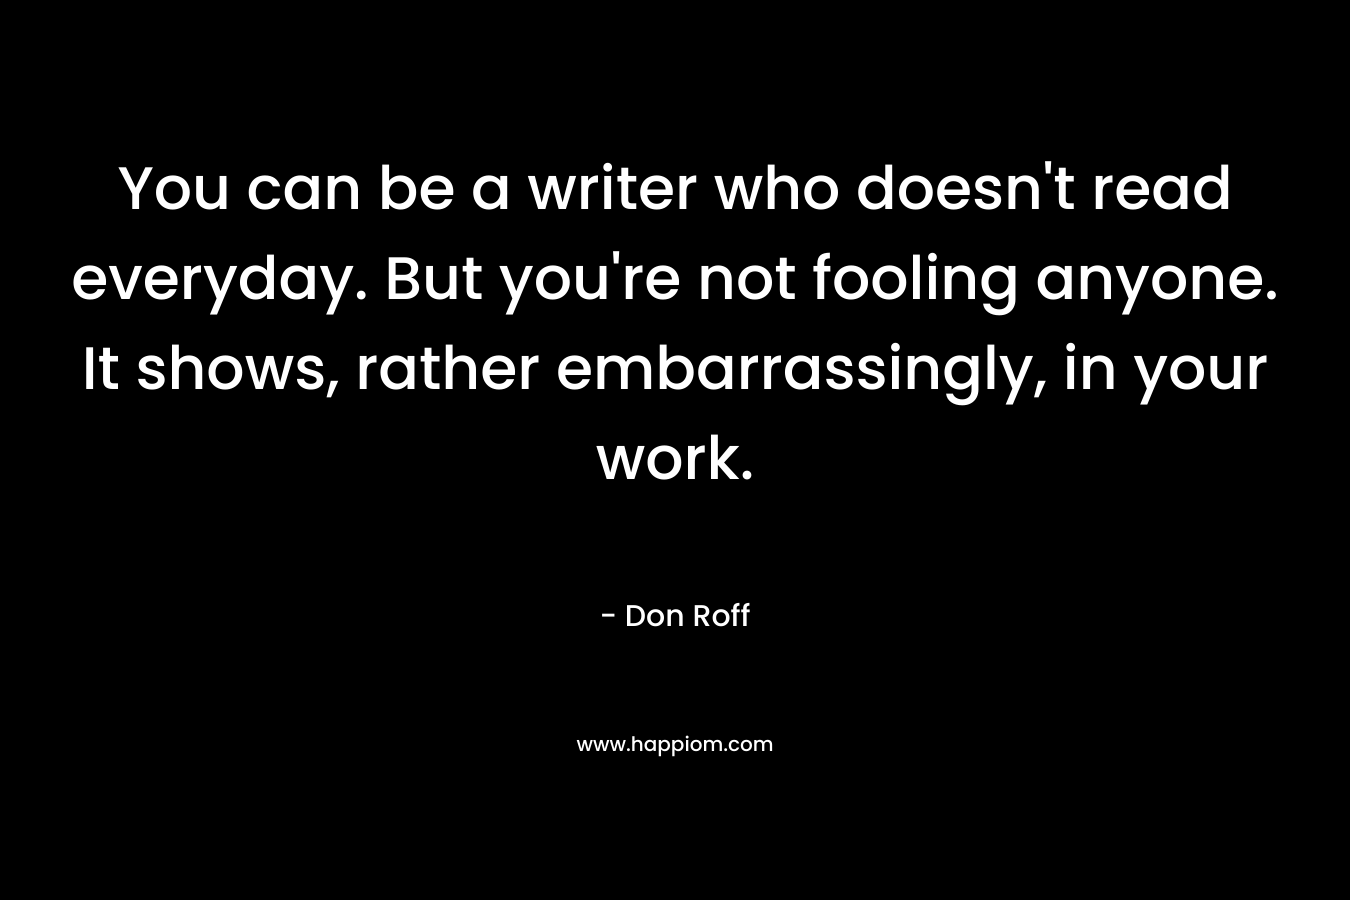 You can be a writer who doesn't read everyday. But you're not fooling anyone. It shows, rather embarrassingly, in your work.